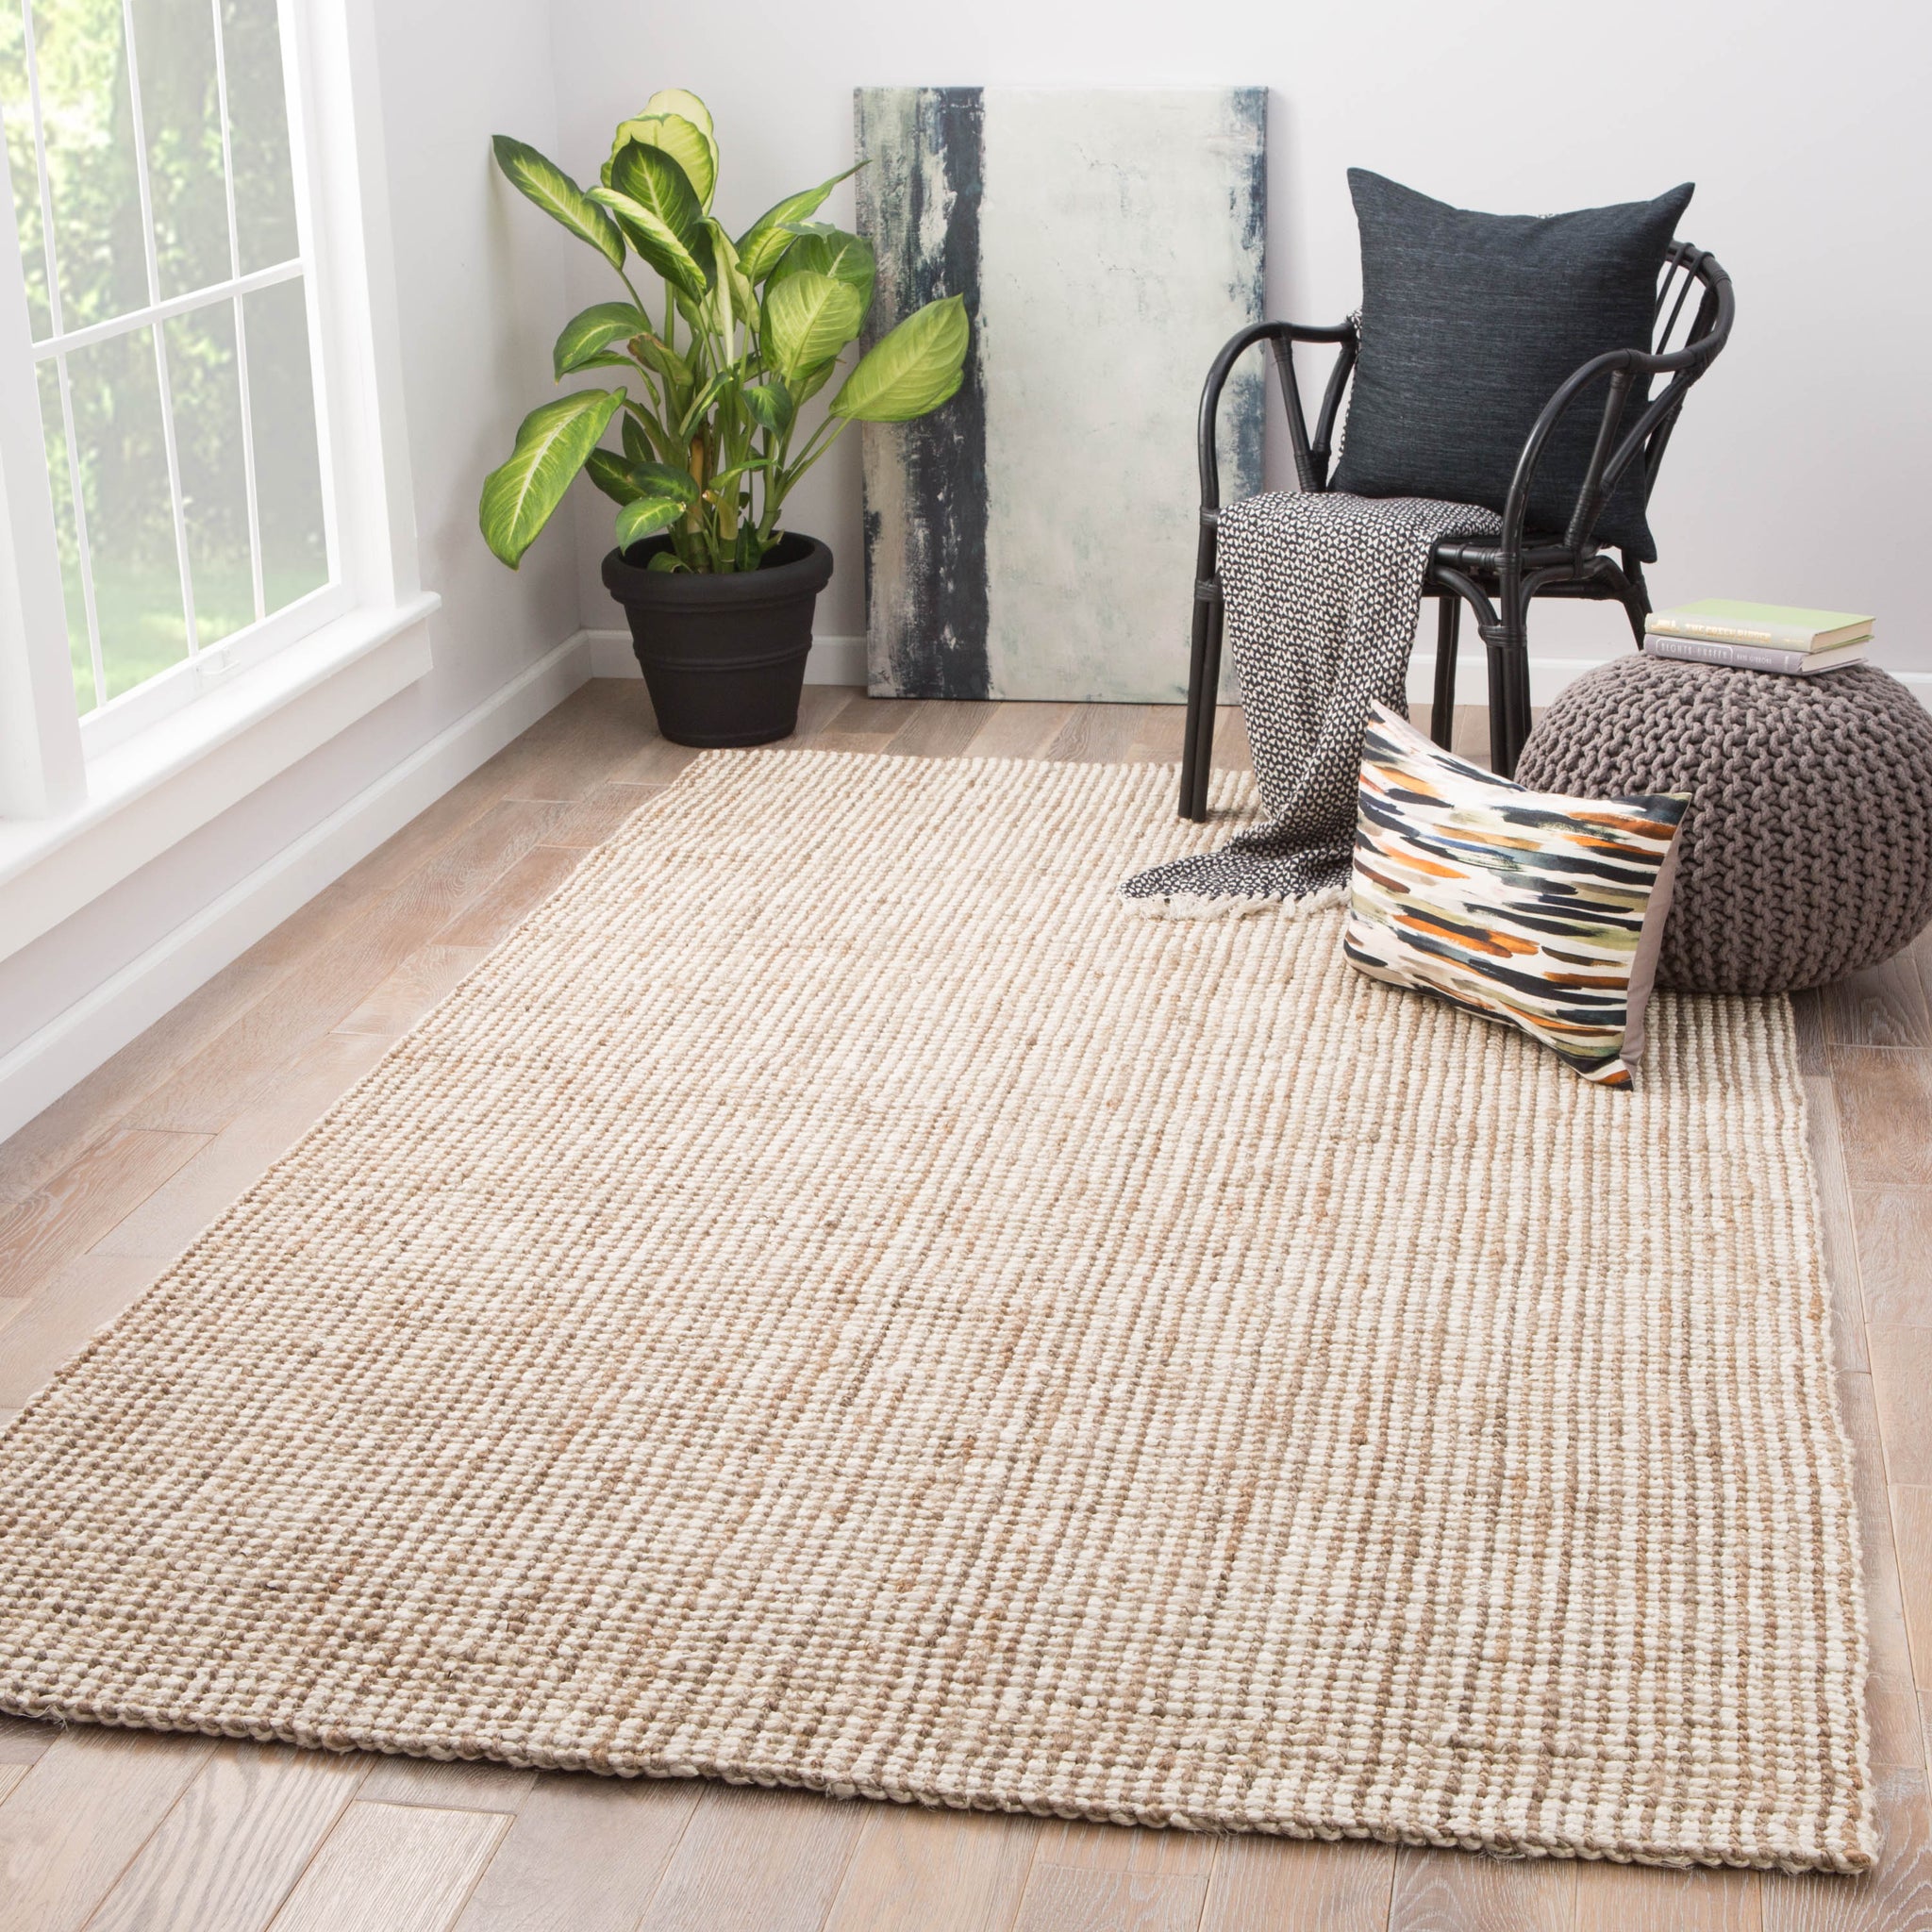 Featured image of post Burke Decor Rugs Shop burkes outlet for affordable home decor home items for every room in the latest styles trends and your favorite holidays